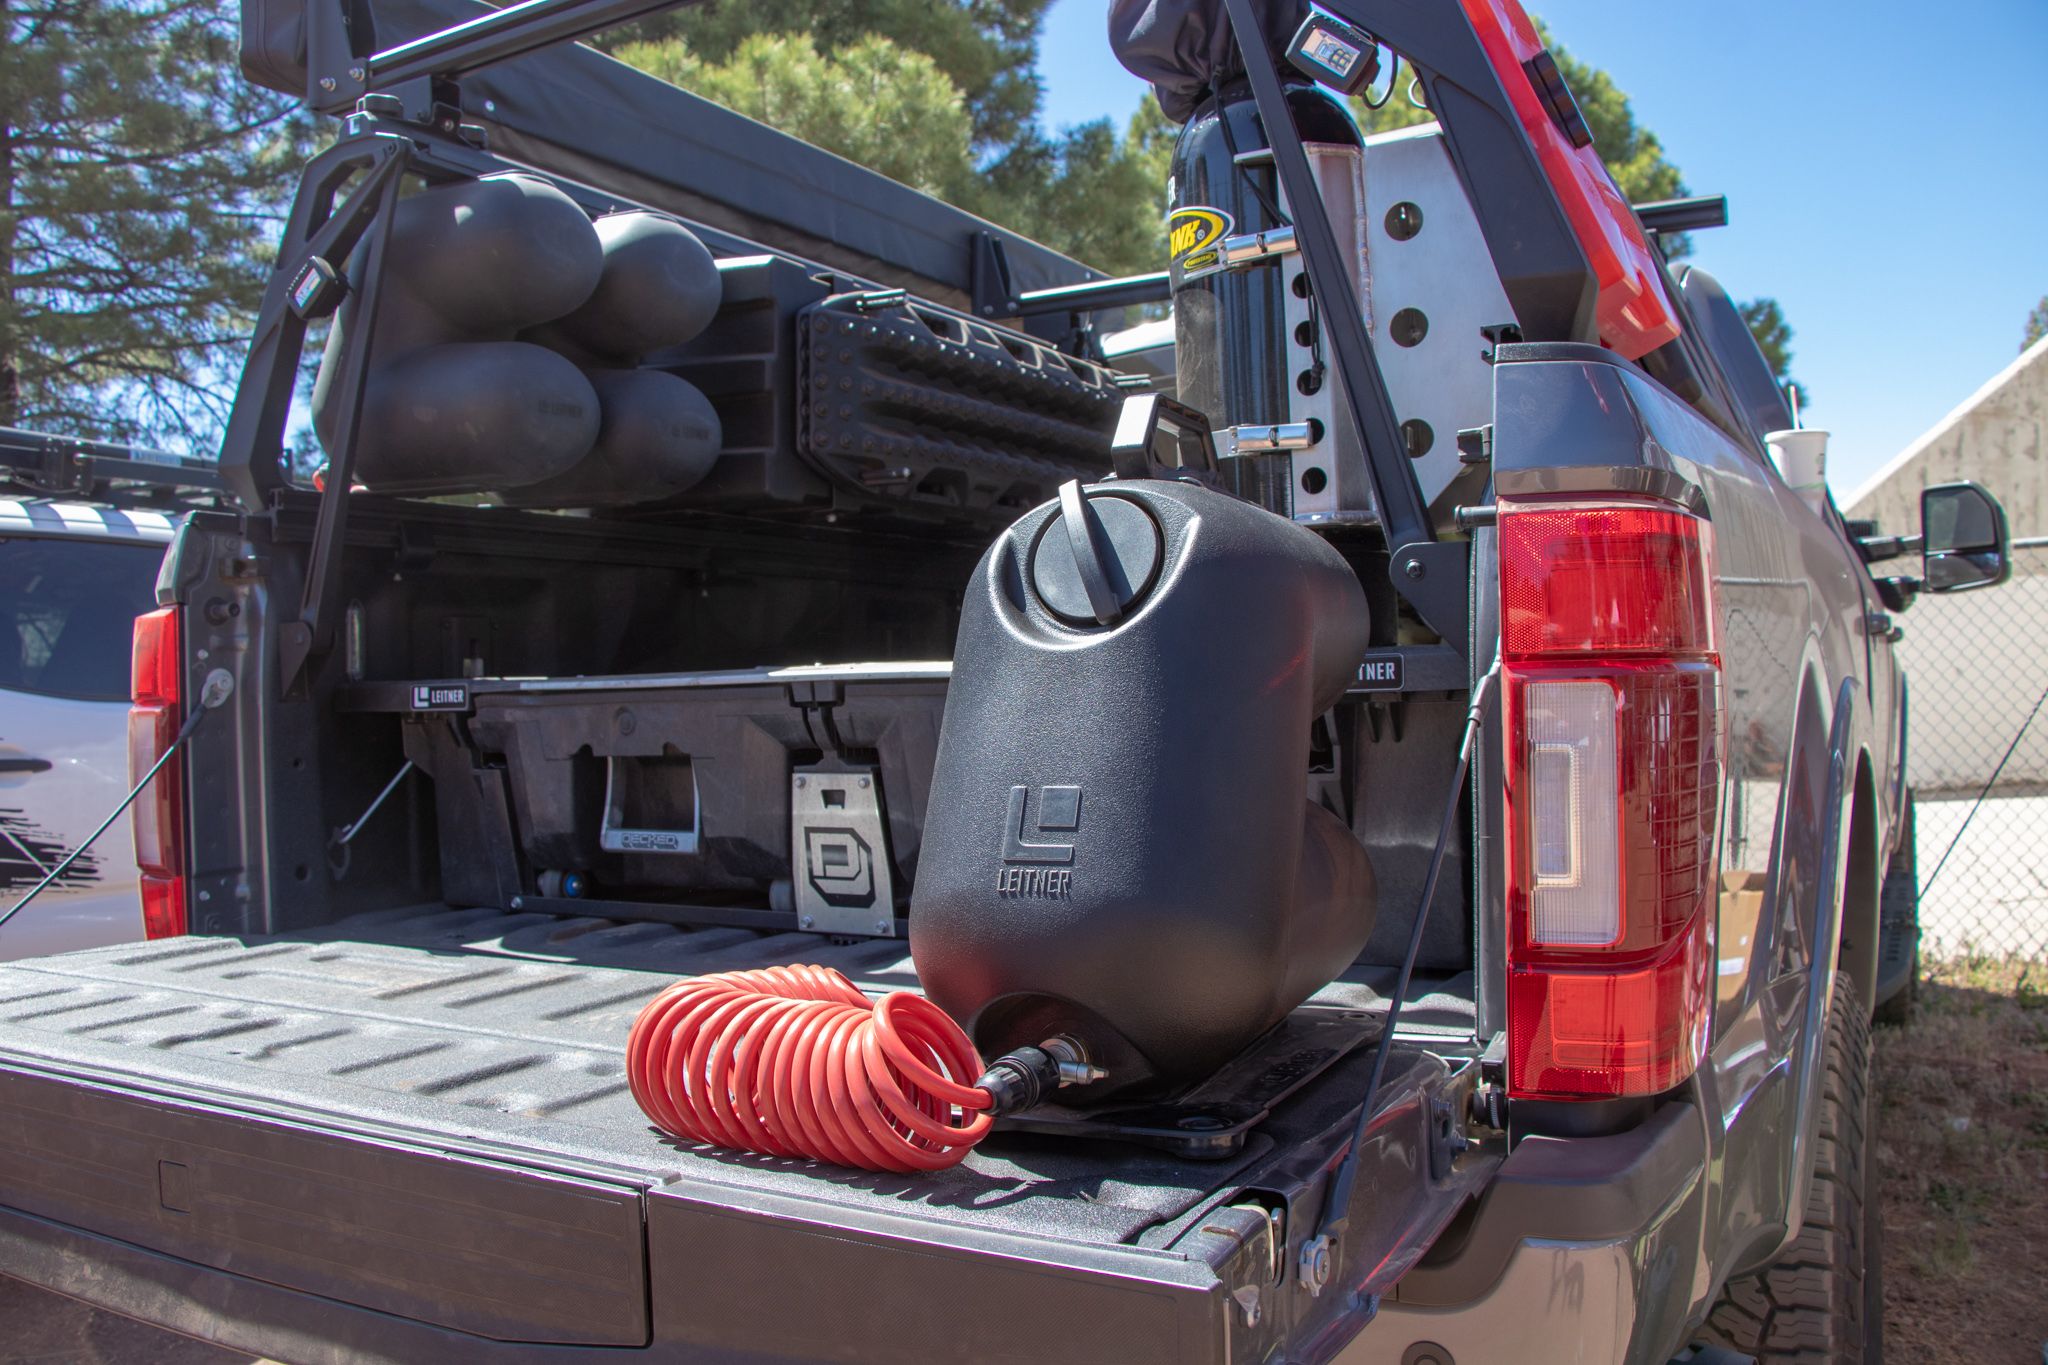 The Best Off-Road Accessories We Saw at Overland Expo West 2022